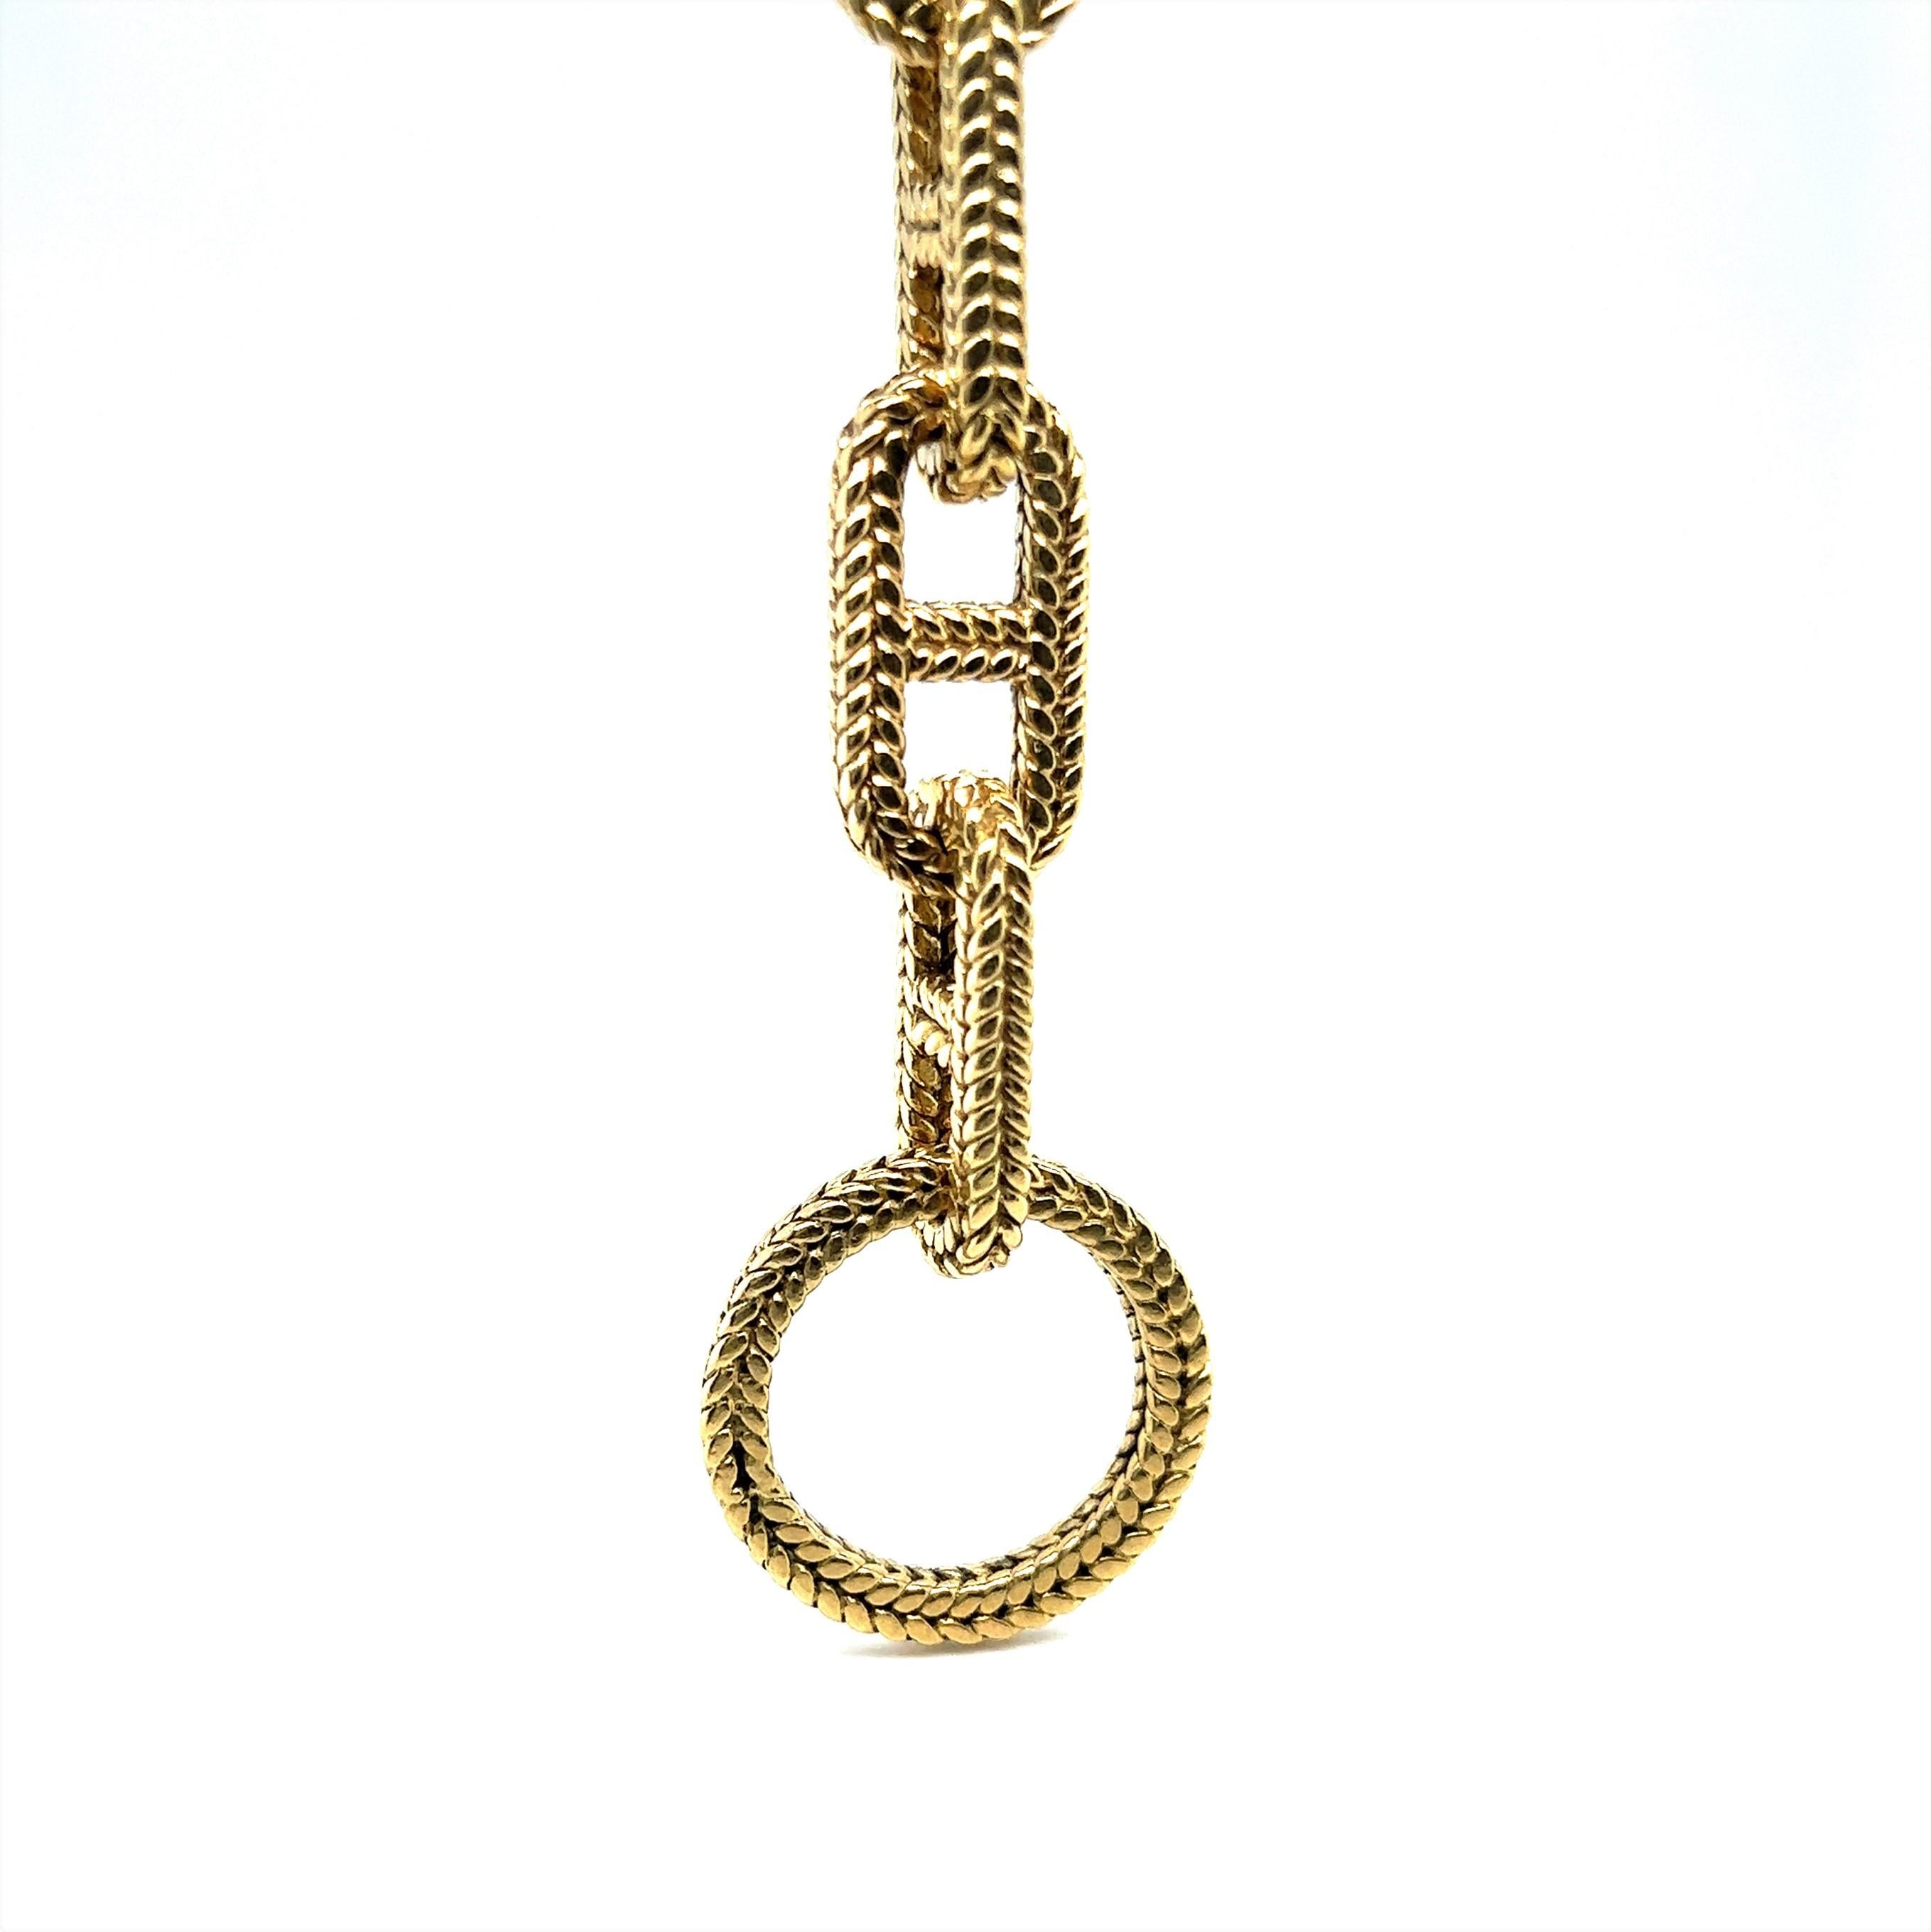 Chain Bracelet “Chaine D'ancre” in 18 Karat Yellow Gold 2